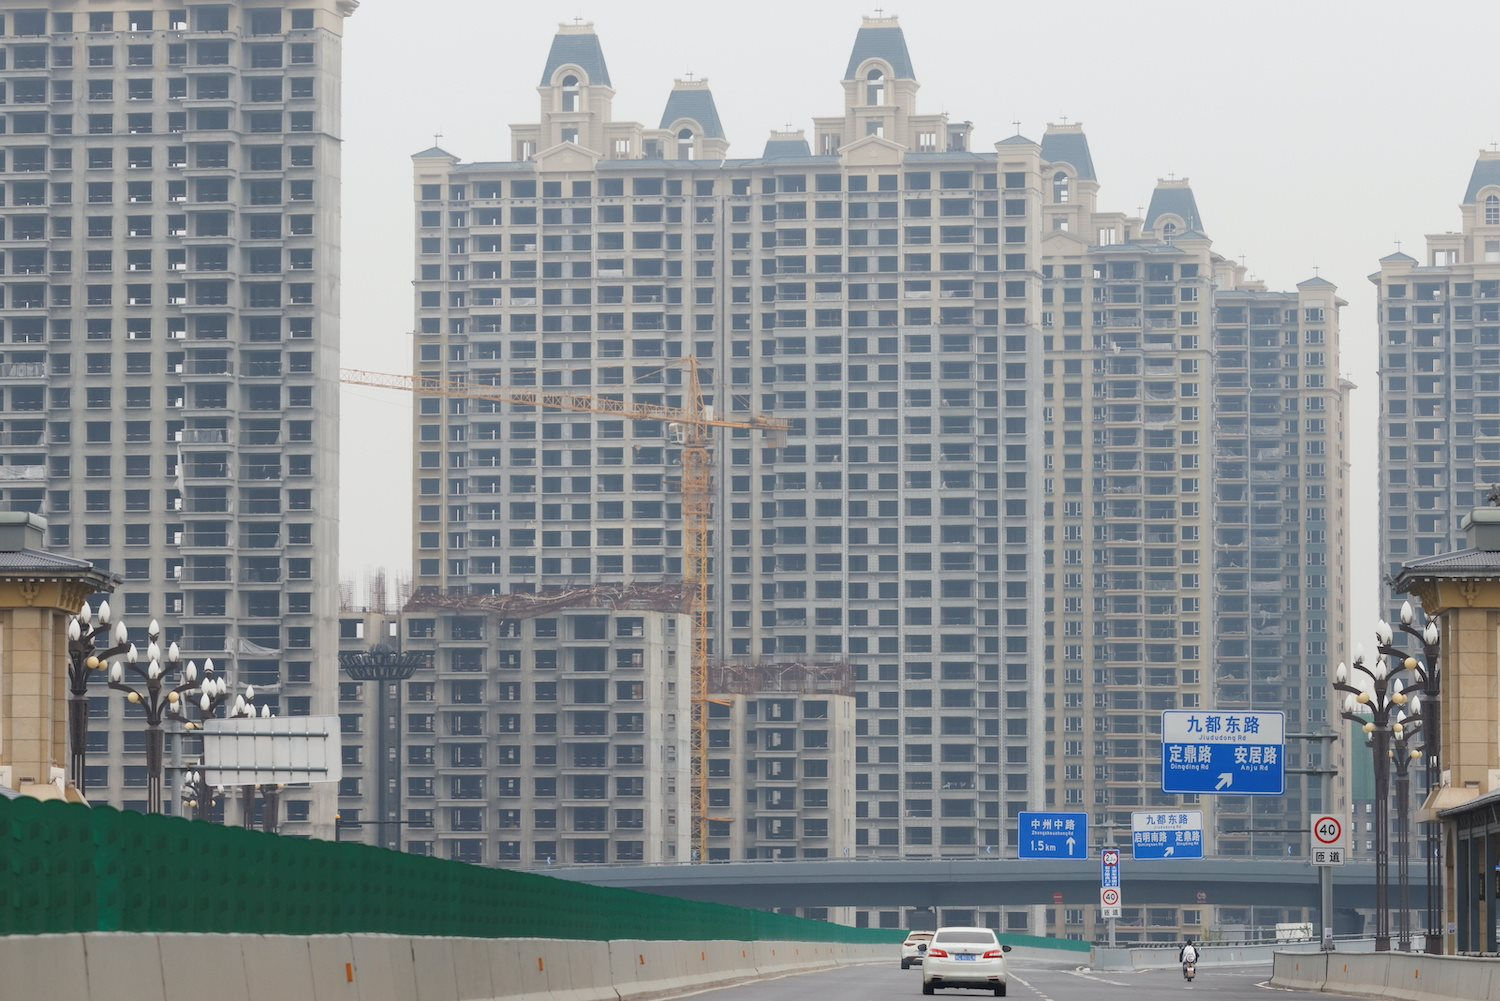 vehicles-drive-near-unfinished-residential-blocks-built-by-evergrande-oasis-a-housing-complex-developed-by-evergrande-group-in-luoyang-china-on-sept-16-2021.-rtrscarlos-garcia-rawlins.jpg